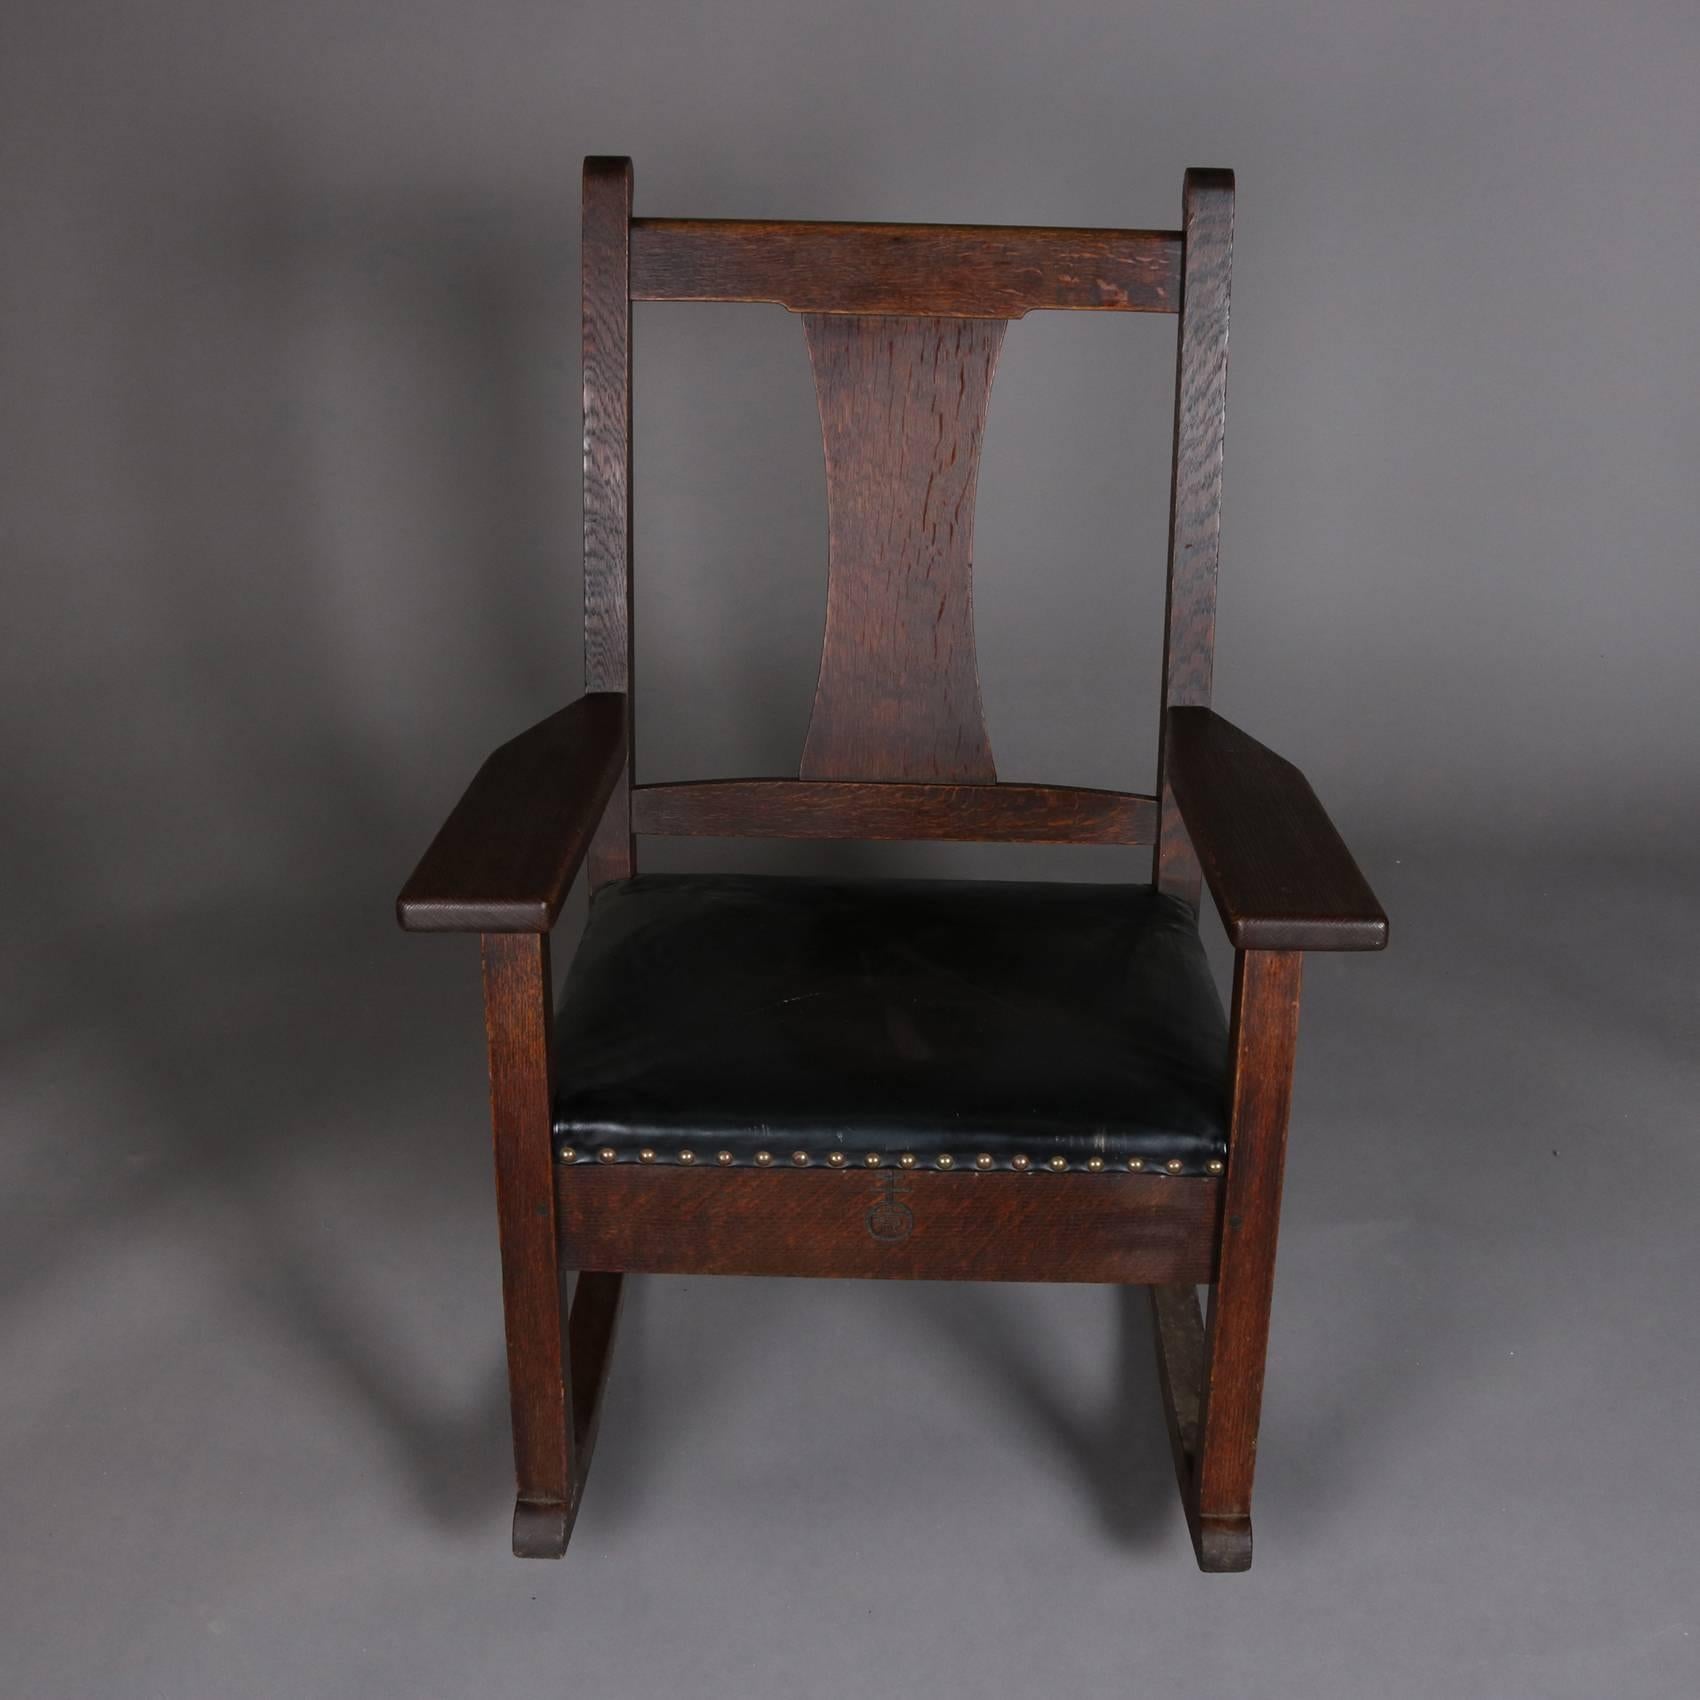 Arts and Crafts Antique Arts & Crafts Mission Oak Rocking Chair by Roycroft, Signed